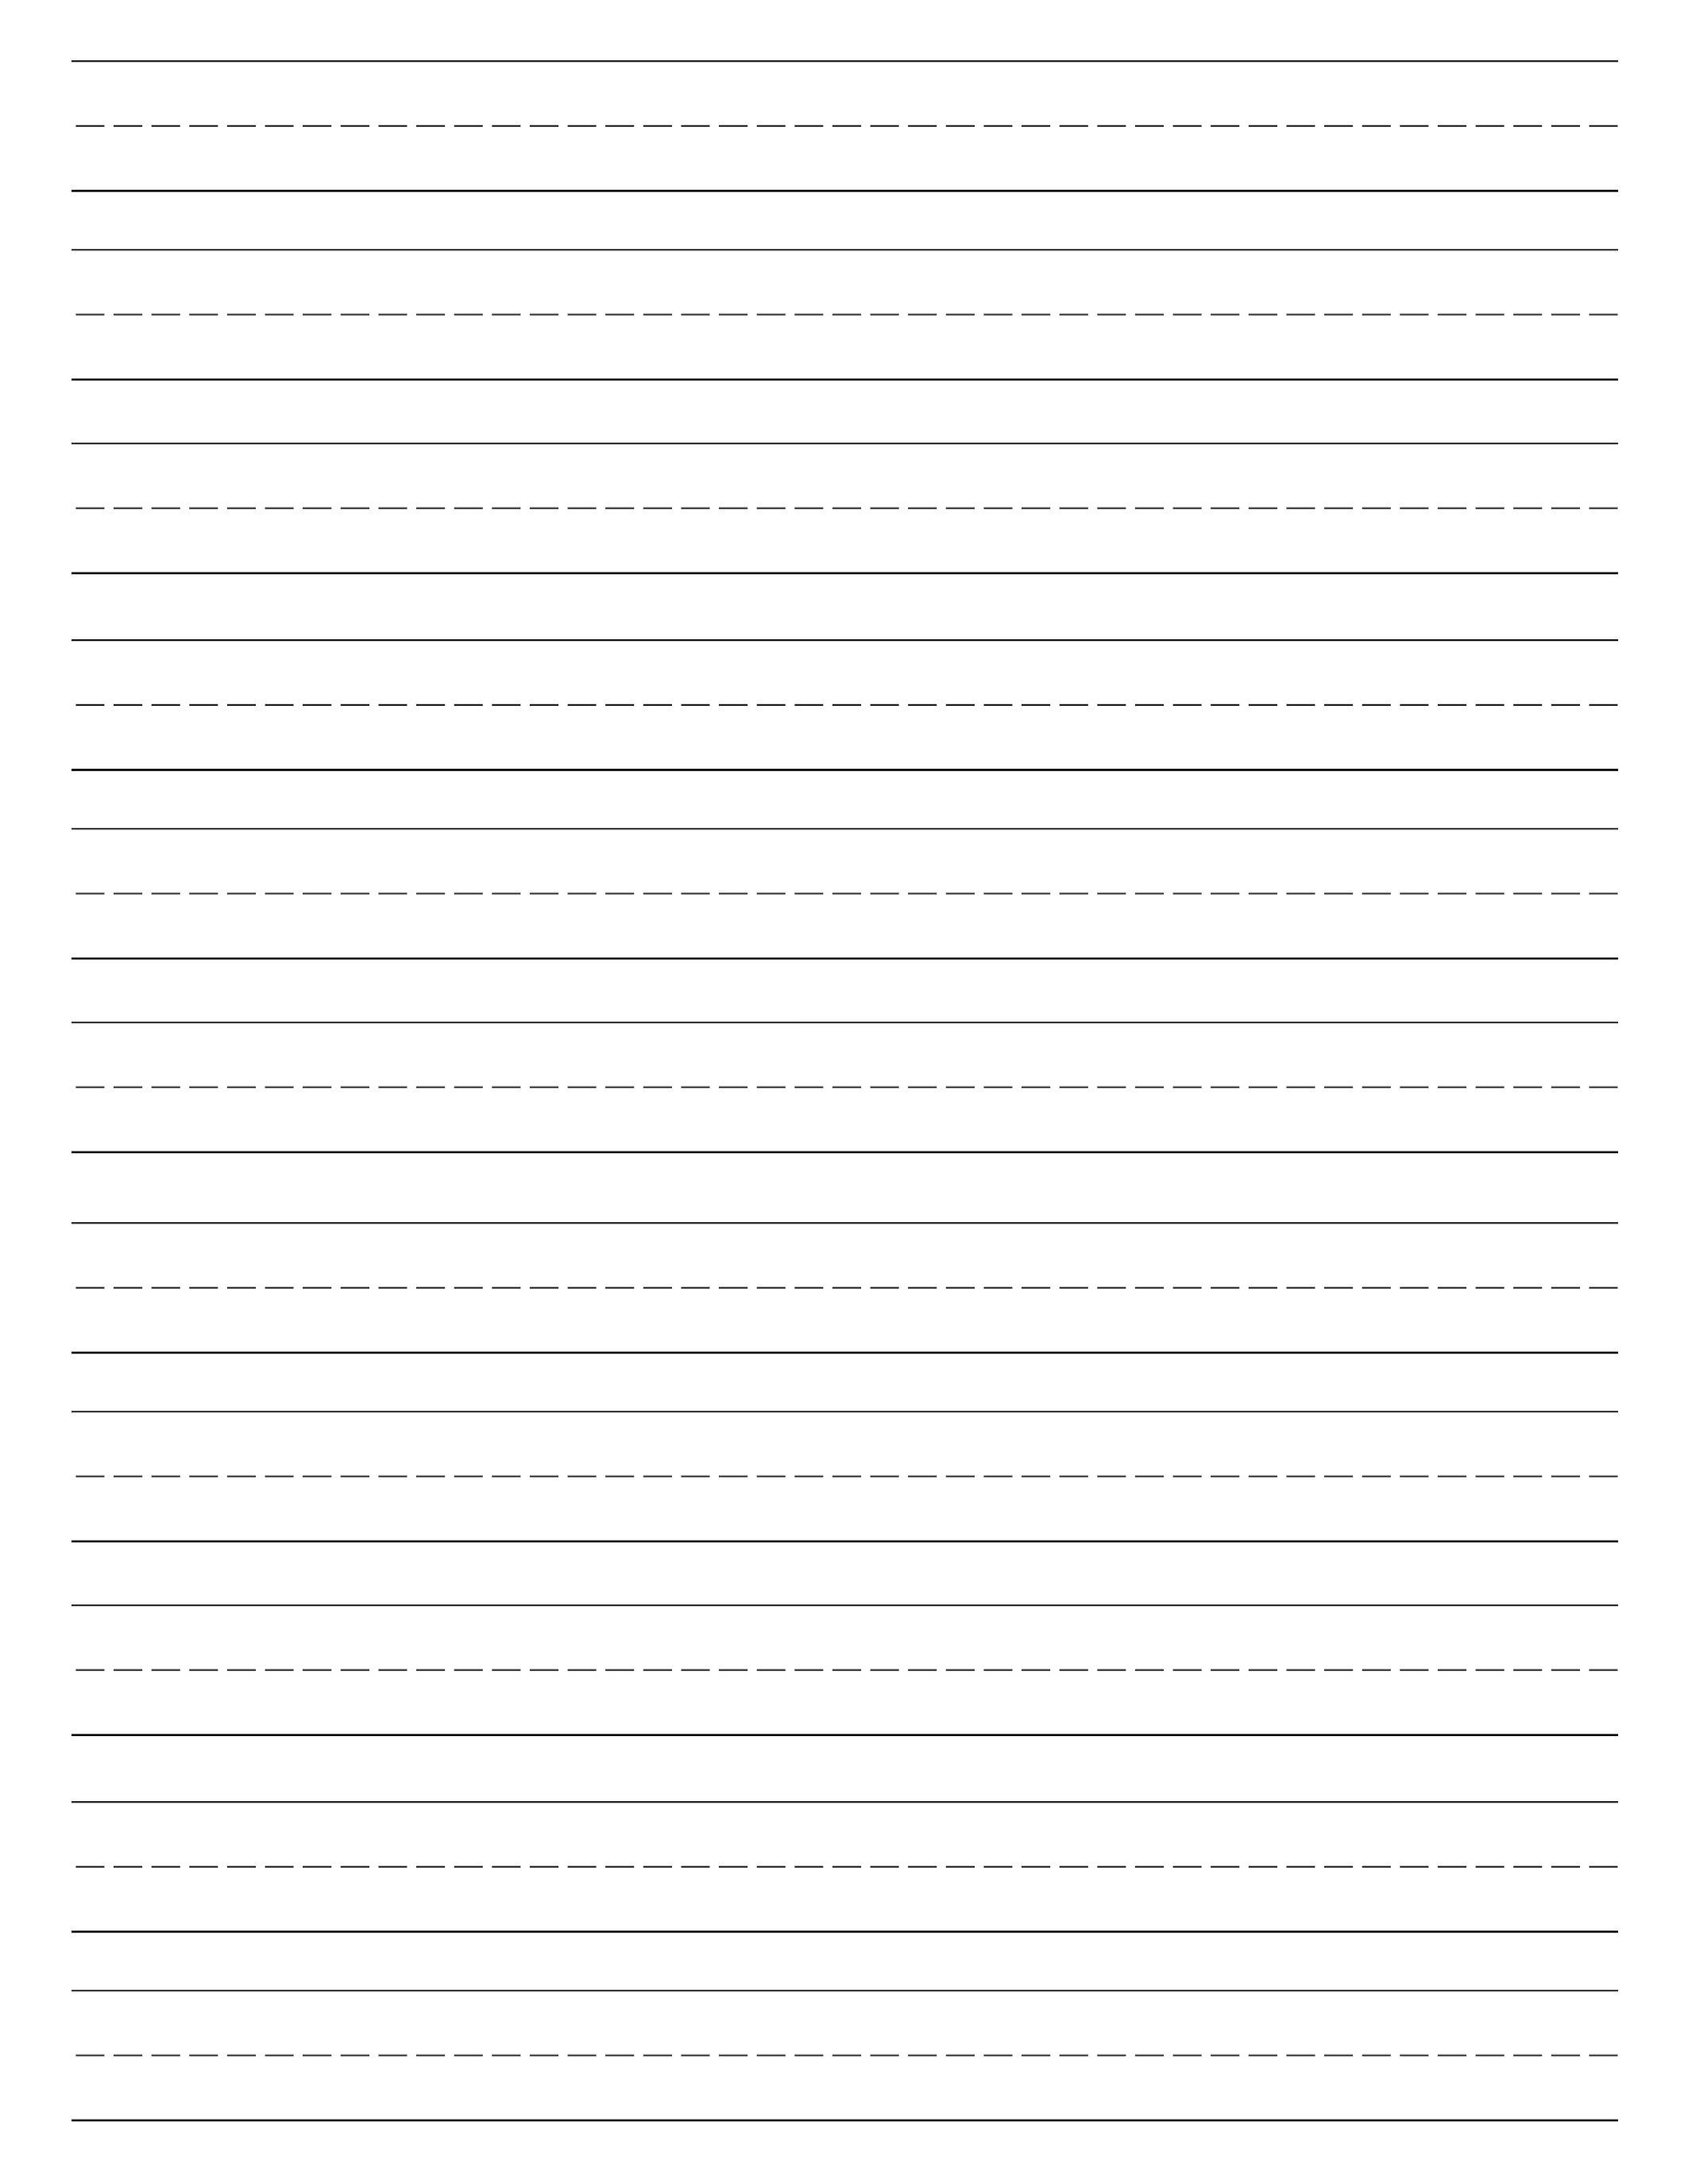 6-best-images-of-elementary-writing-paper-printable-elementary-school